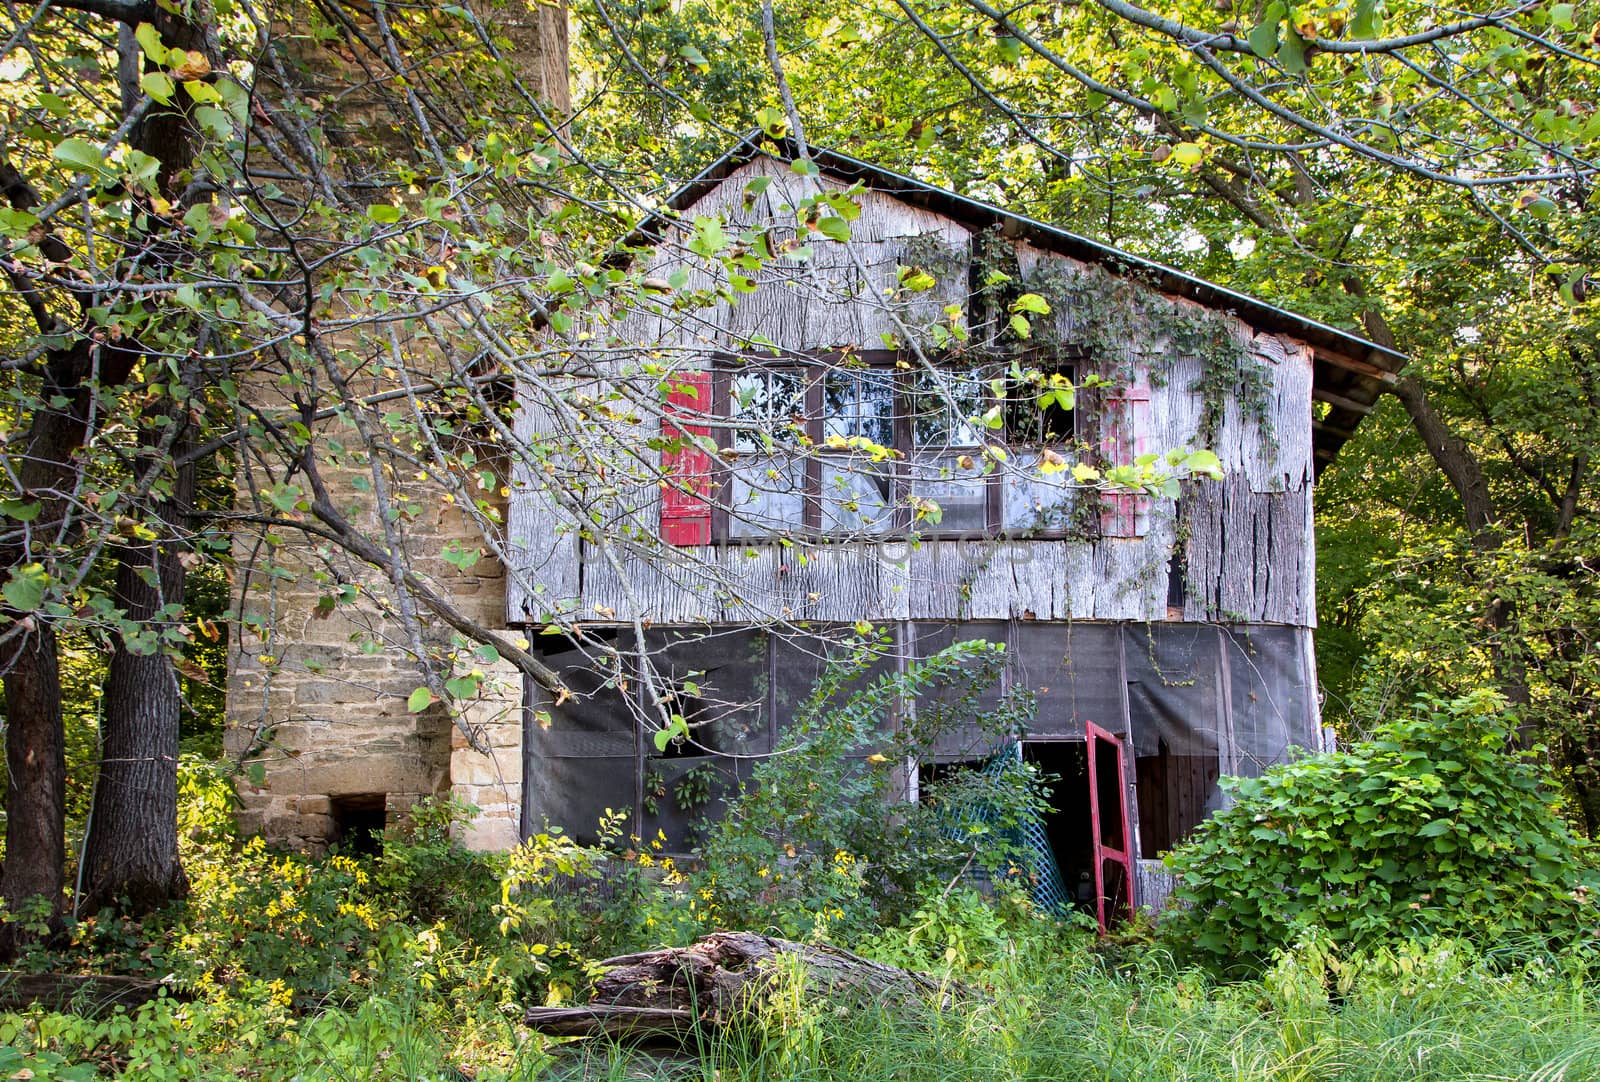  Dilapidated River House by wolterk